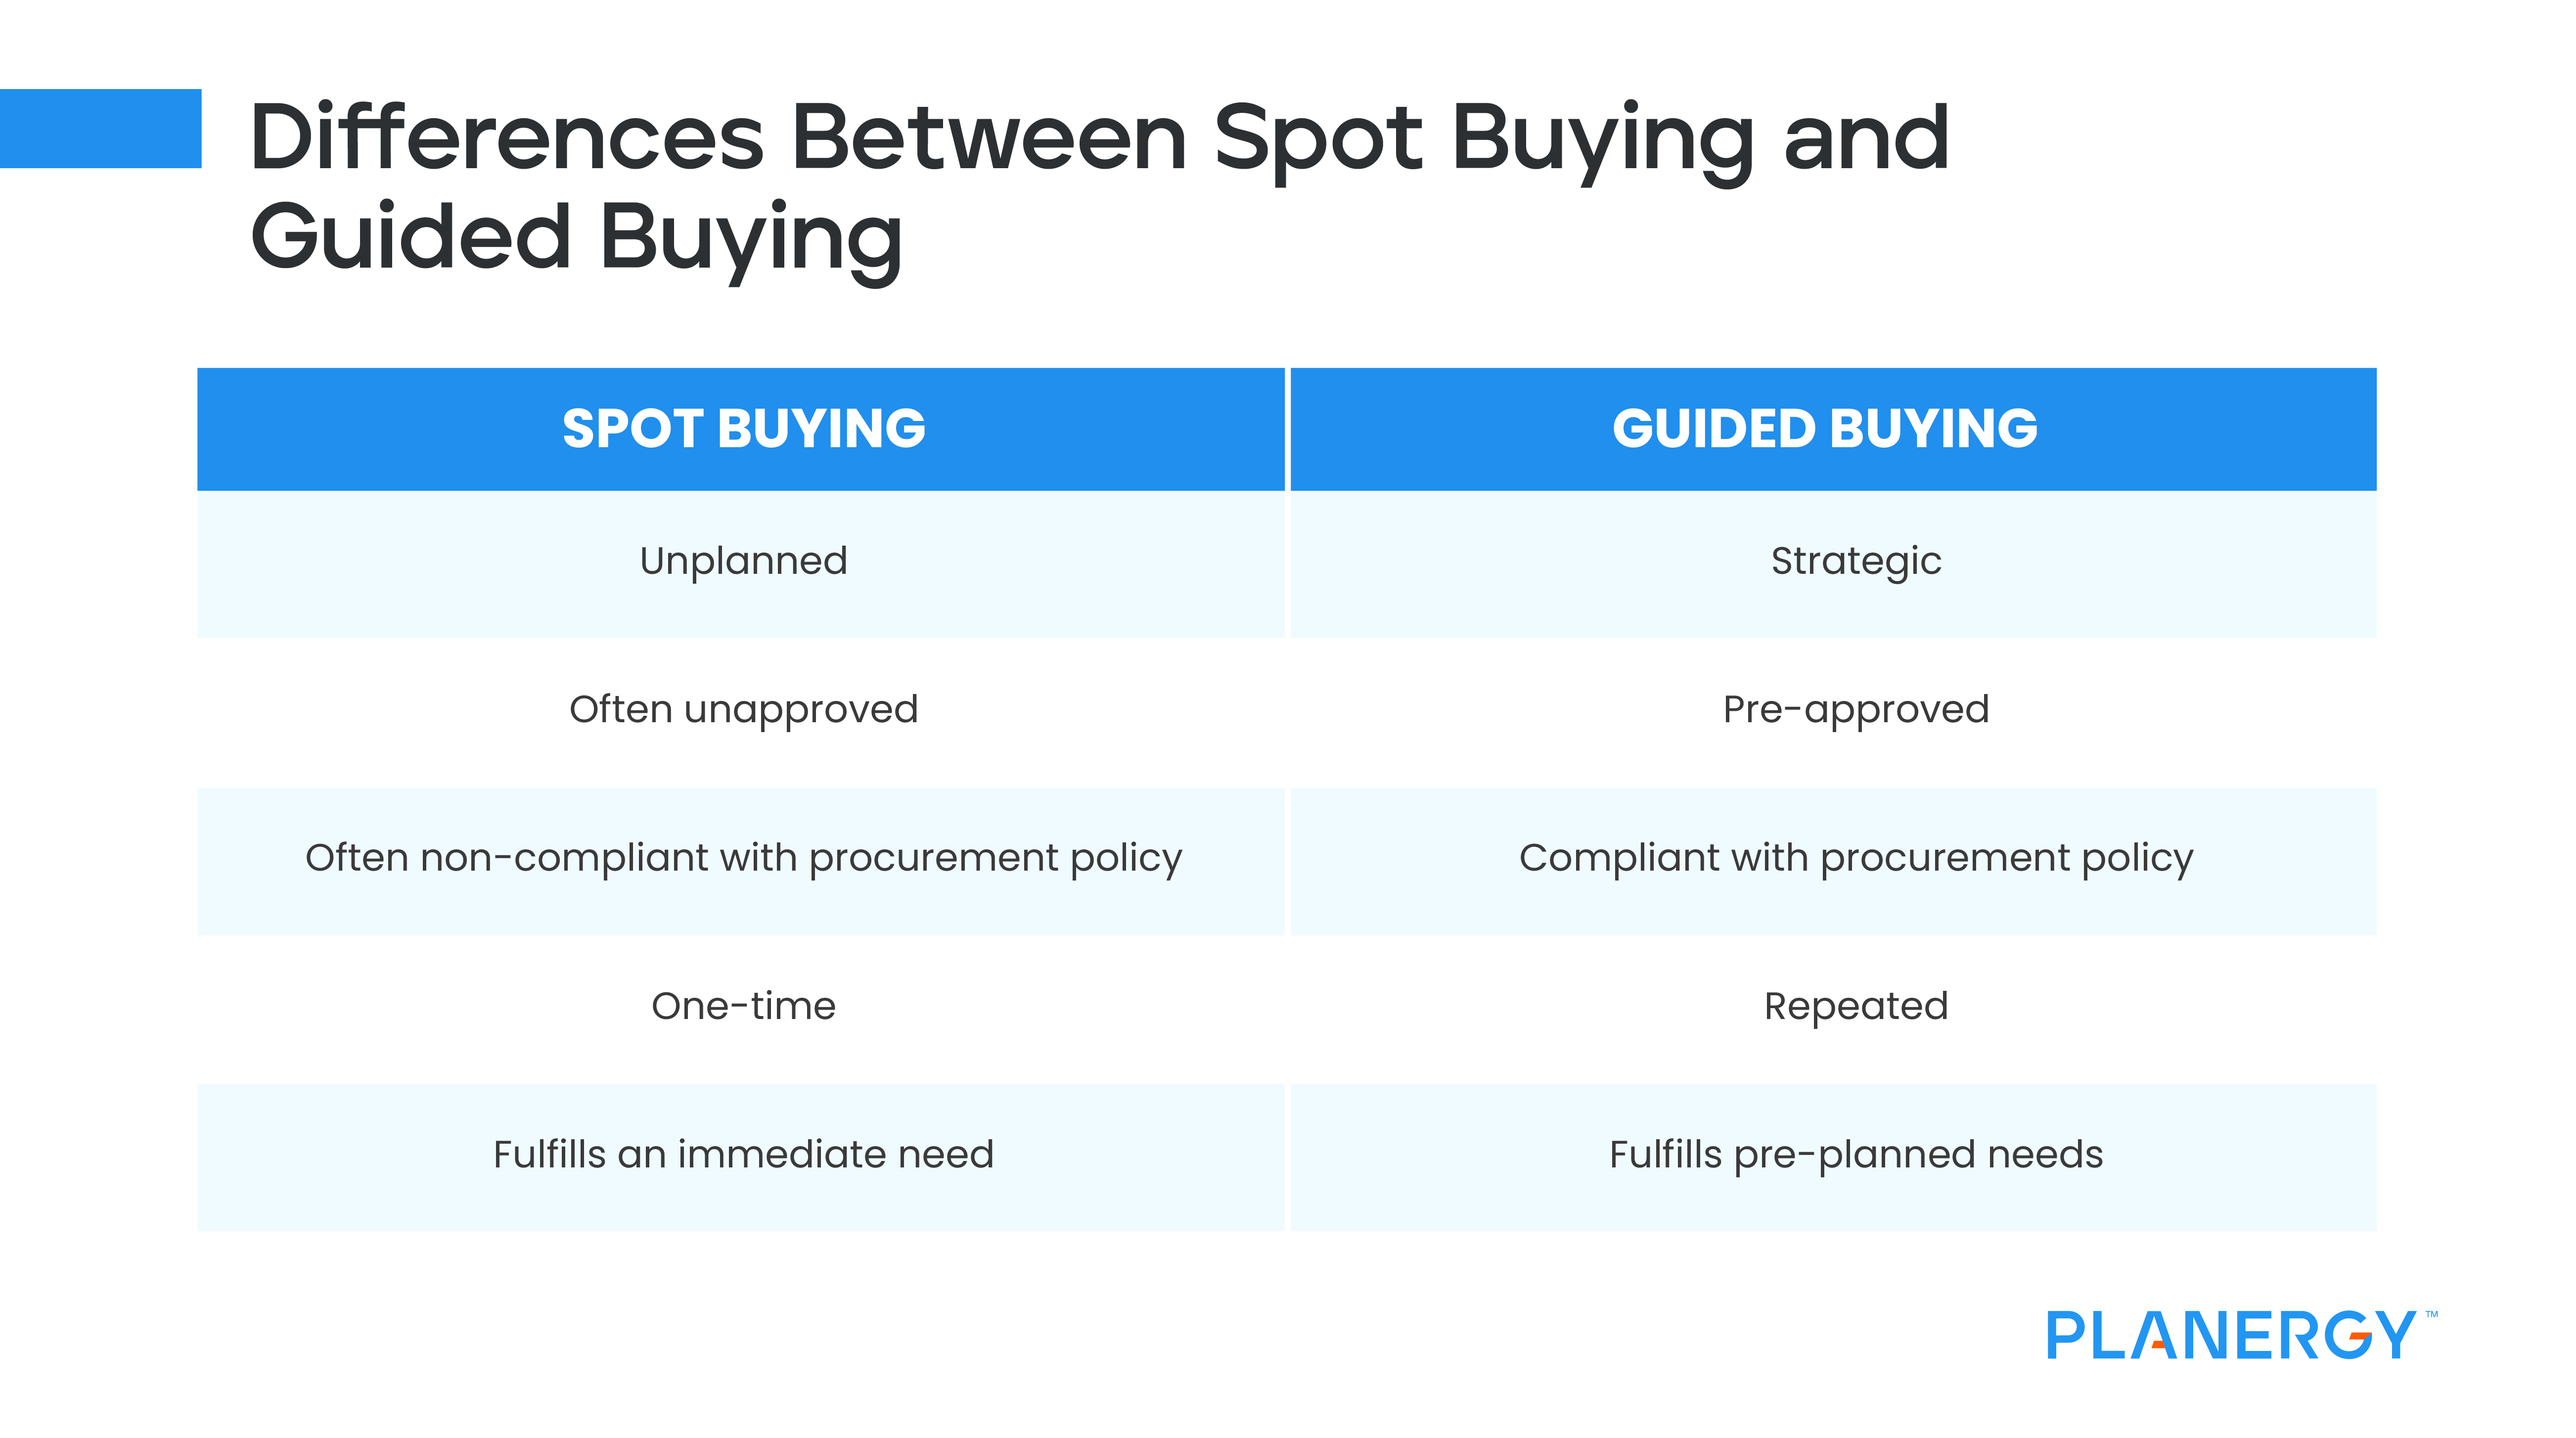 Differences Between Spot Buying and Guided Buying